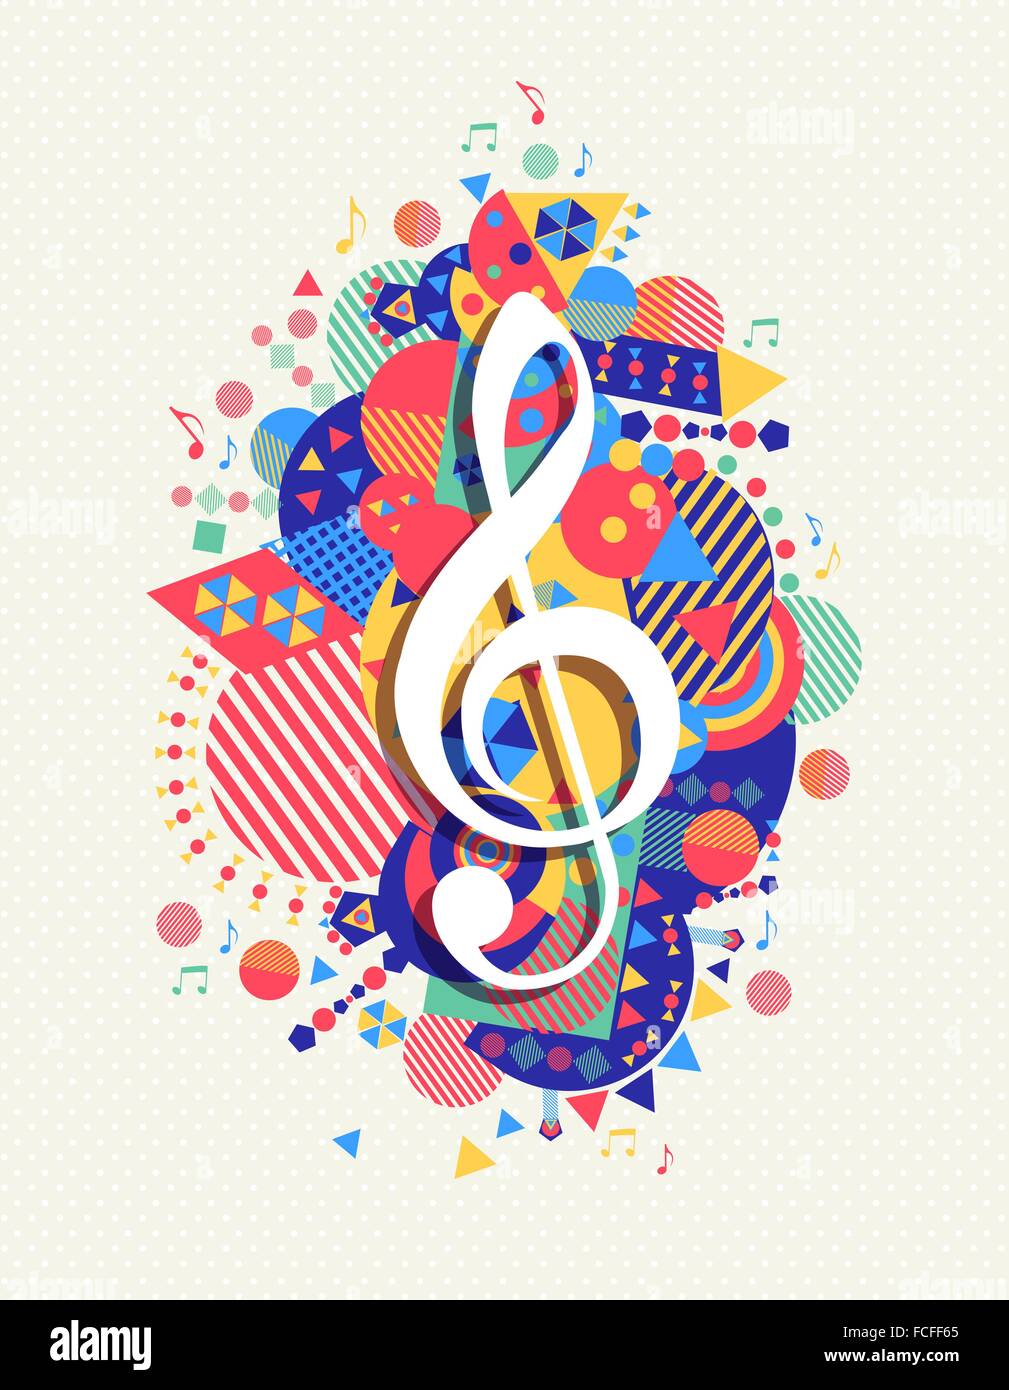 cool music notes design